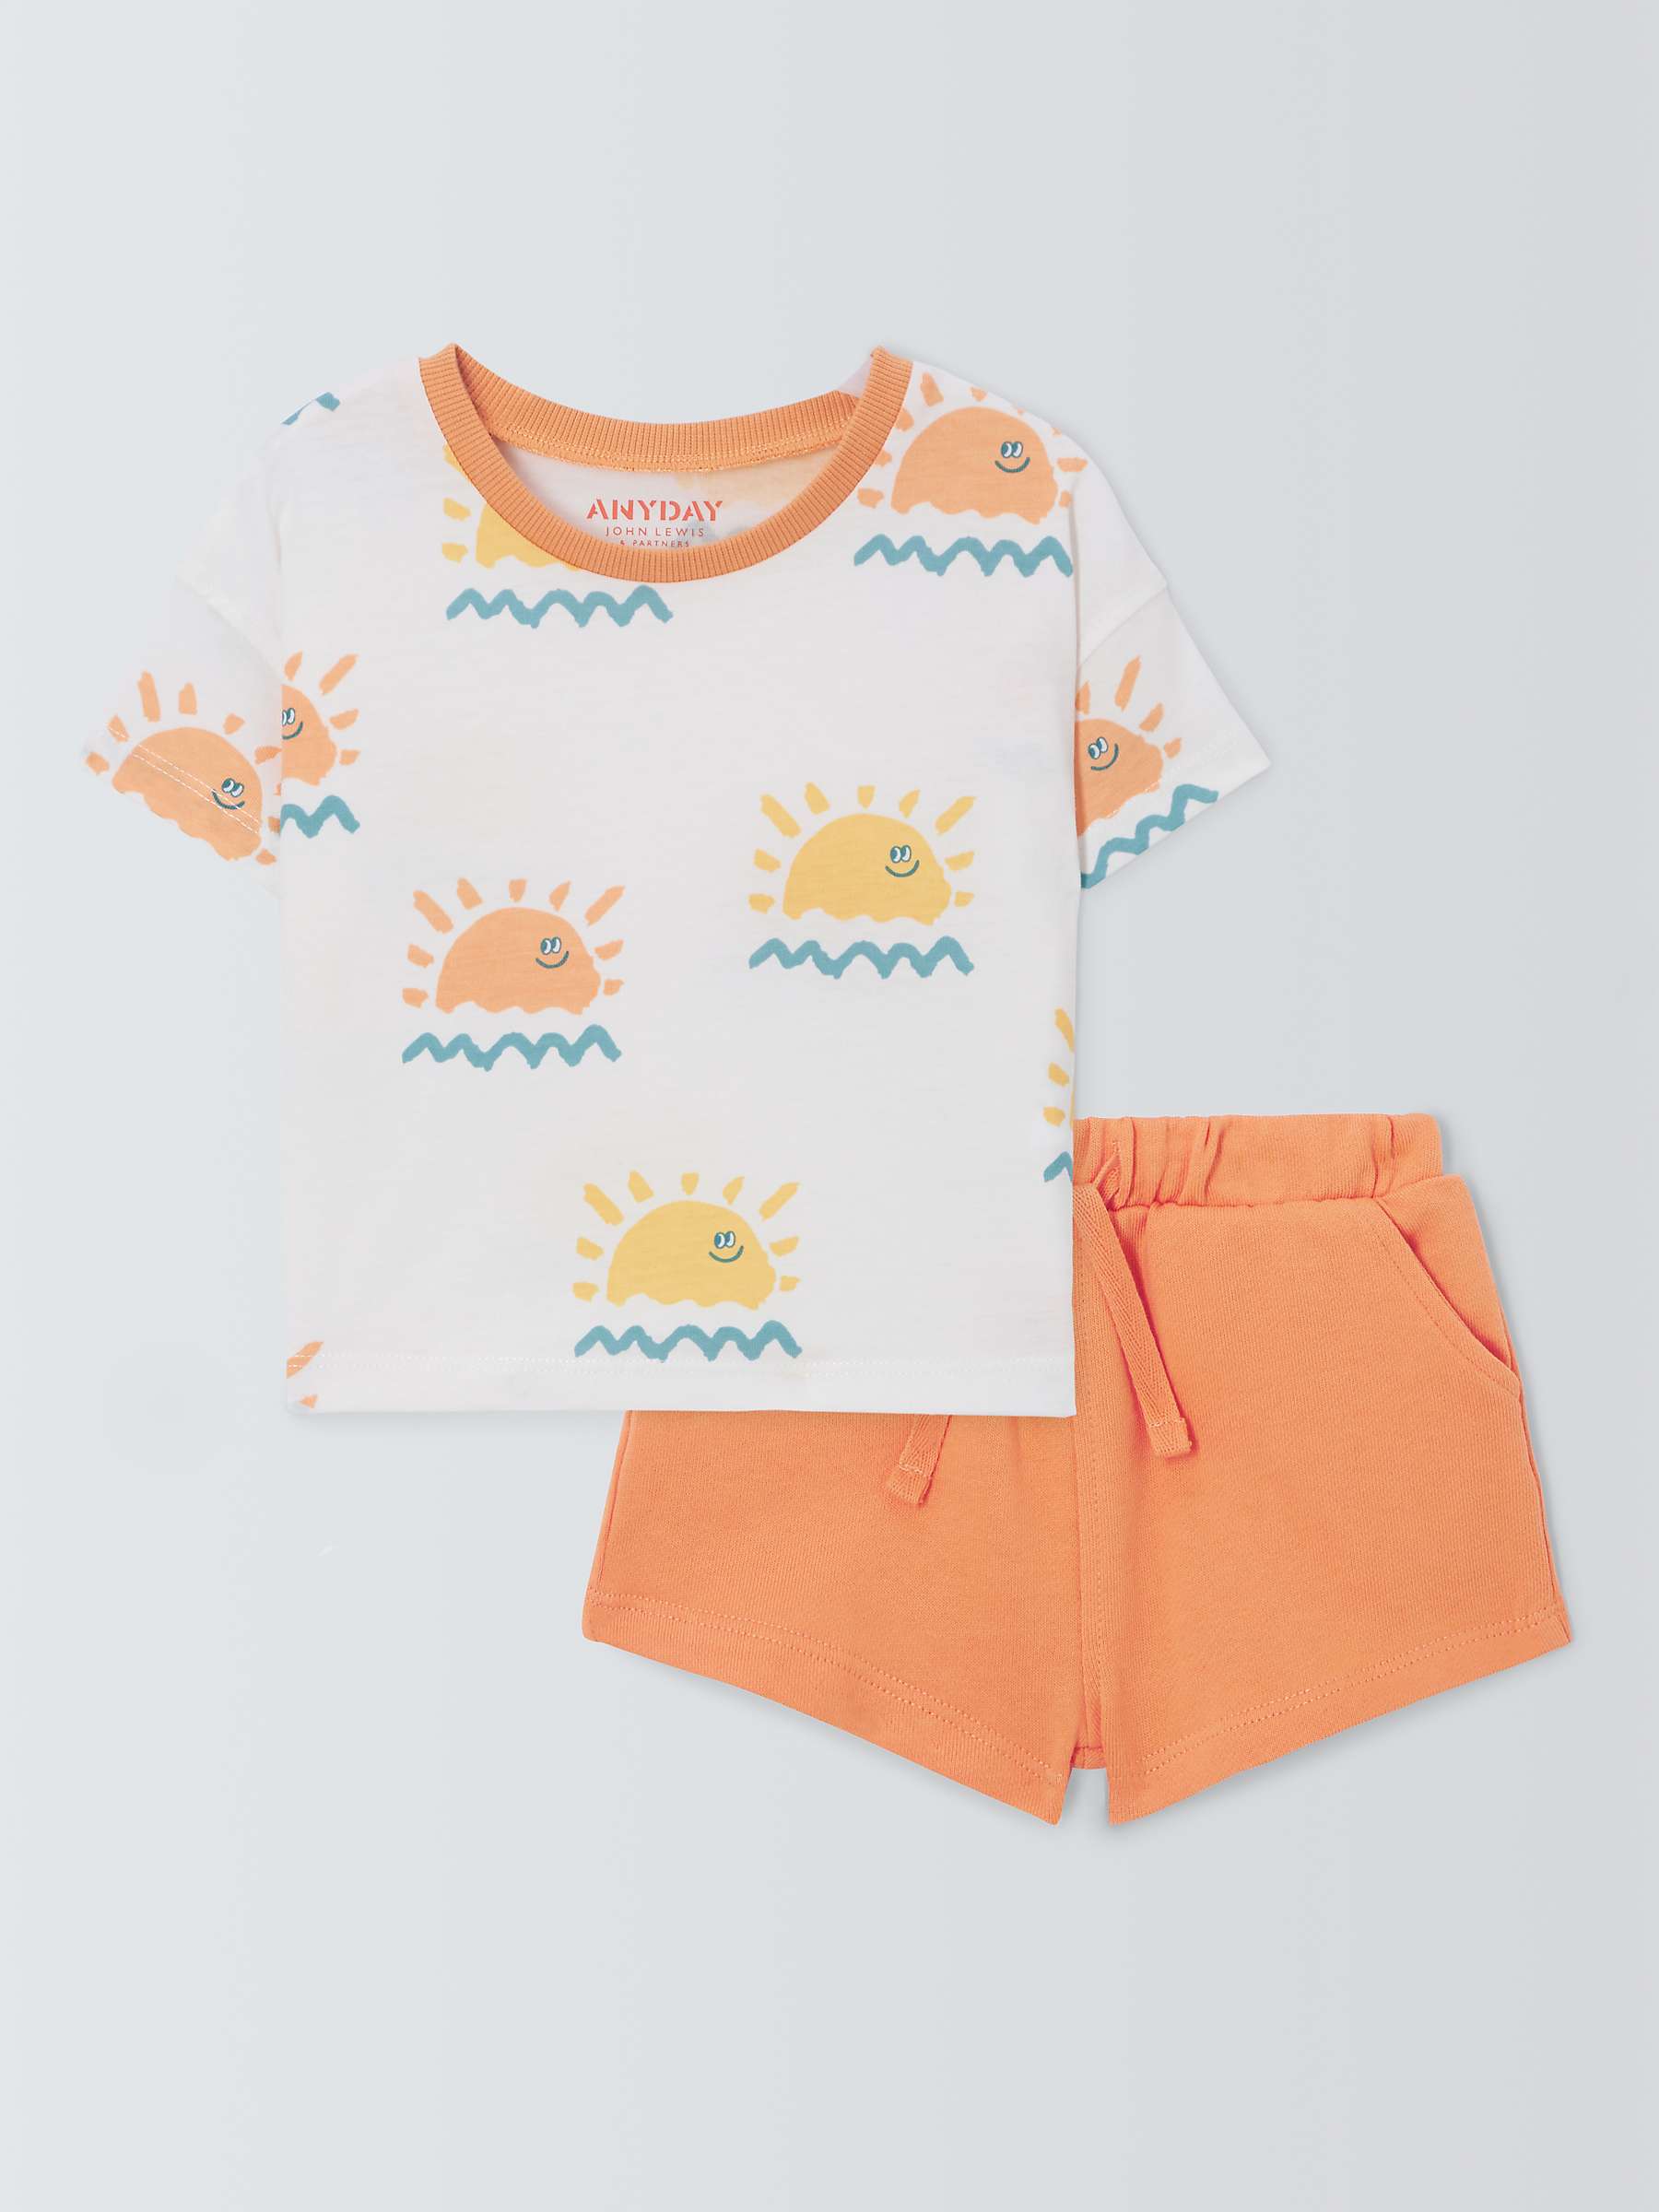 Buy John Lewis ANYDAY Baby Sun Wave T-Shirt and Shorts Set Online at johnlewis.com